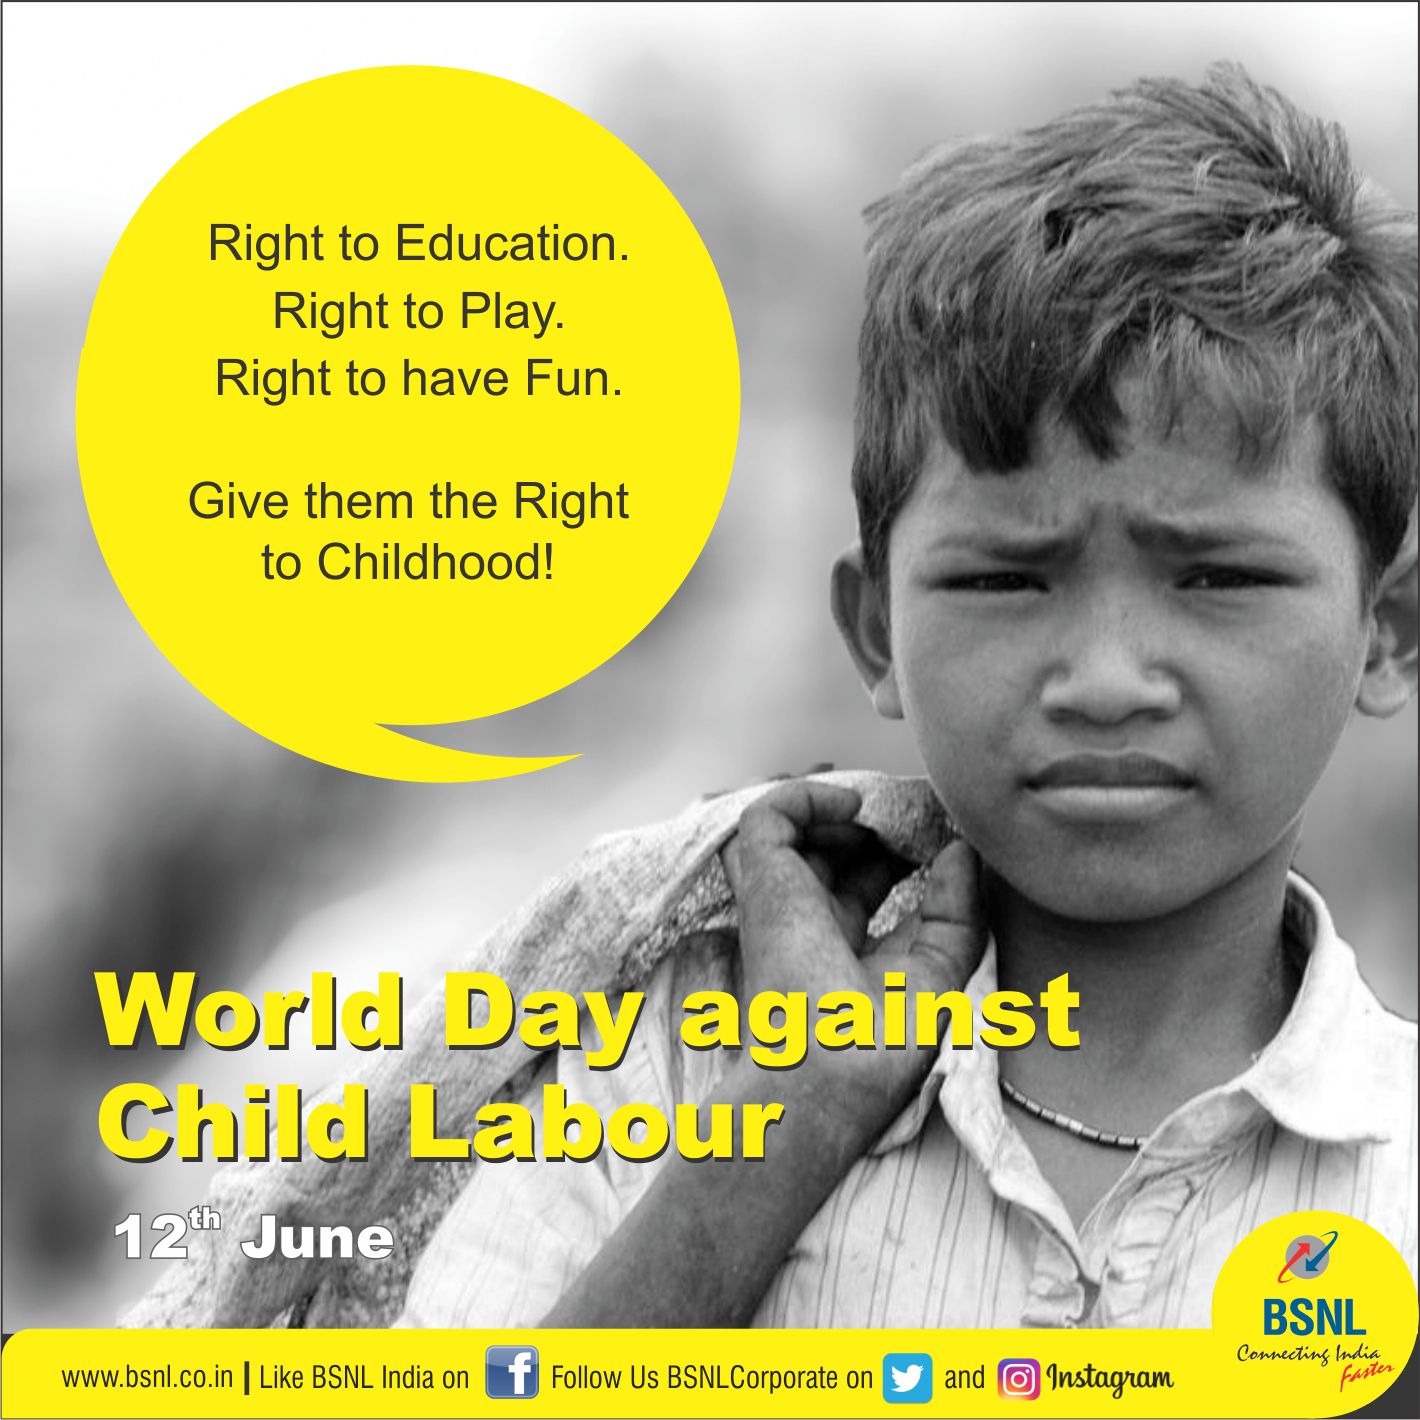 Bsnl India Auf Twitter Child Is Meant To Learn Not To Earn For A Better Nation Stop Child Labour Wdacl Un Unicef Childlabourday Worlddayagainstchildlabour T Co Ylff841k0u